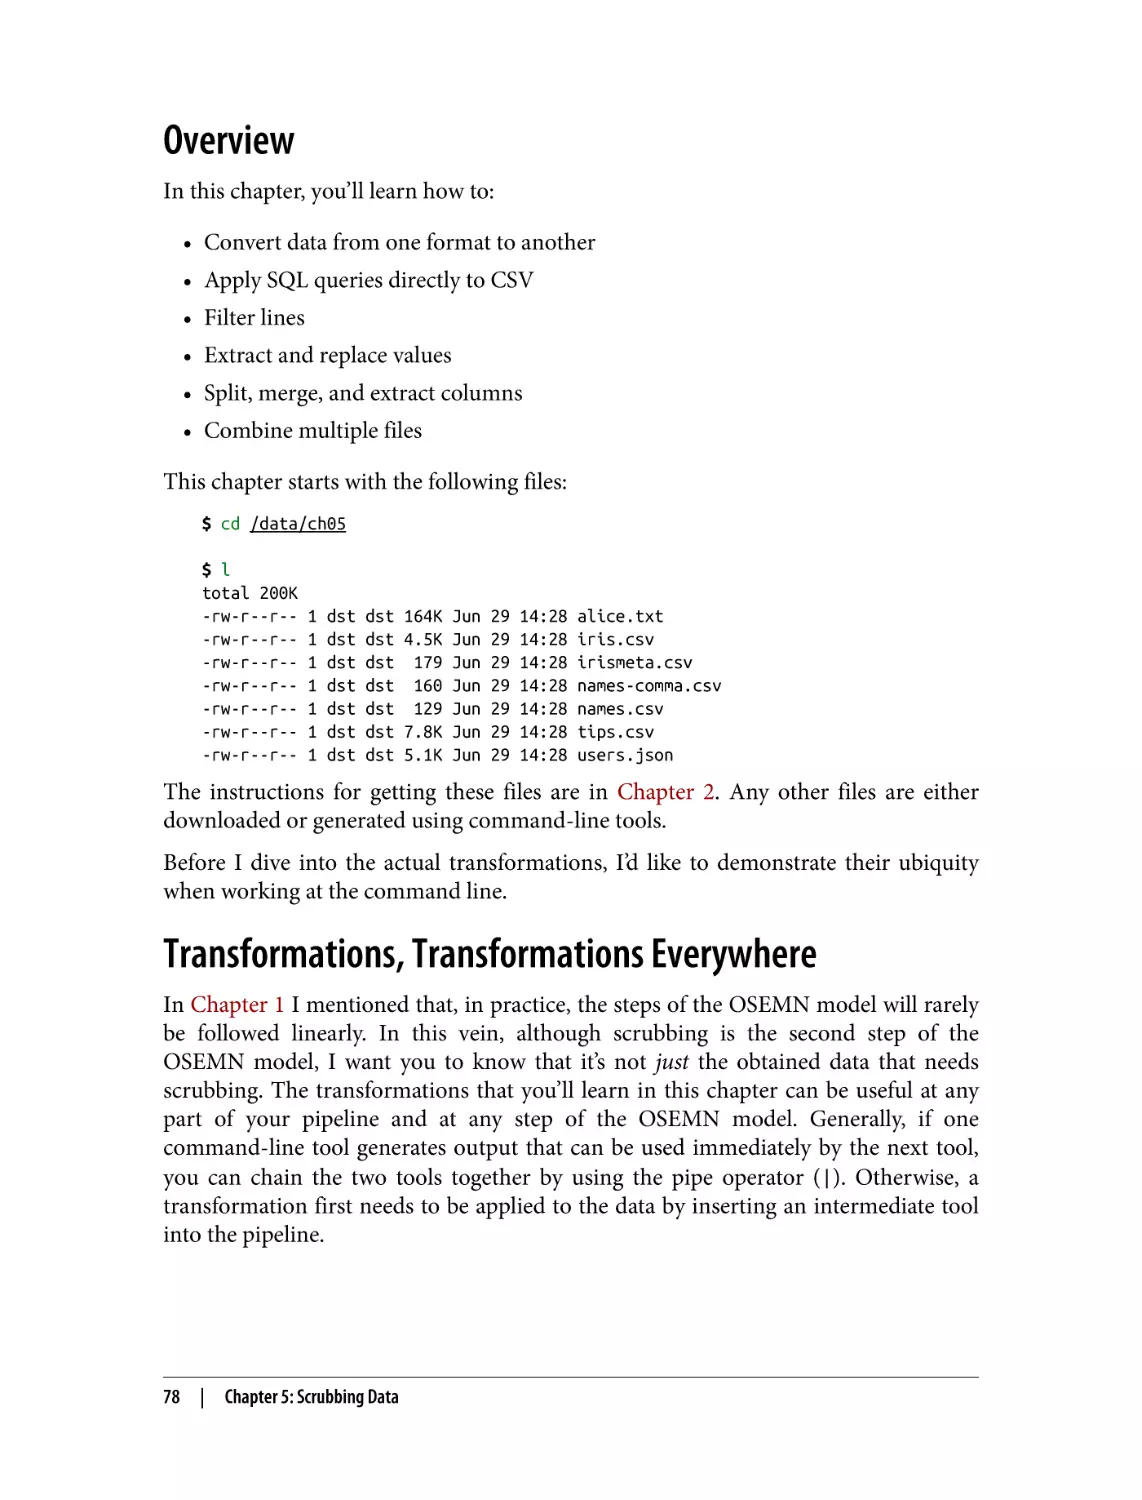 Overview
Transformations, Transformations Everywhere